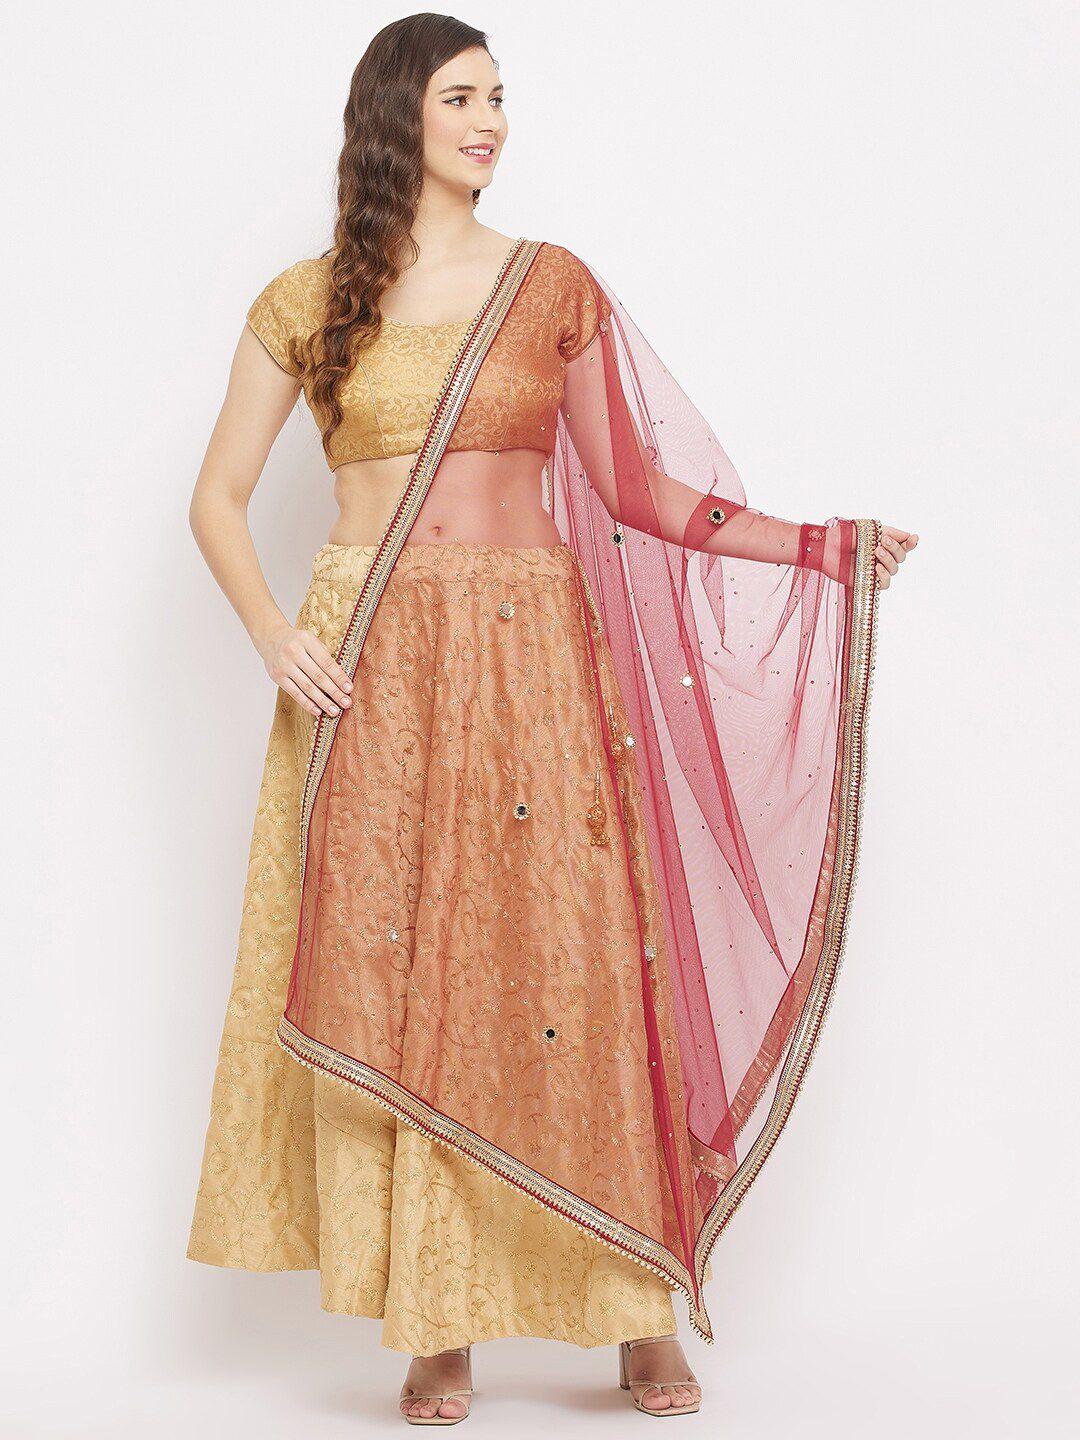 clora-creation-maroon-&-gold-toned-ethnic-motifs-embroidered-dupatta-with-beads-and-stones